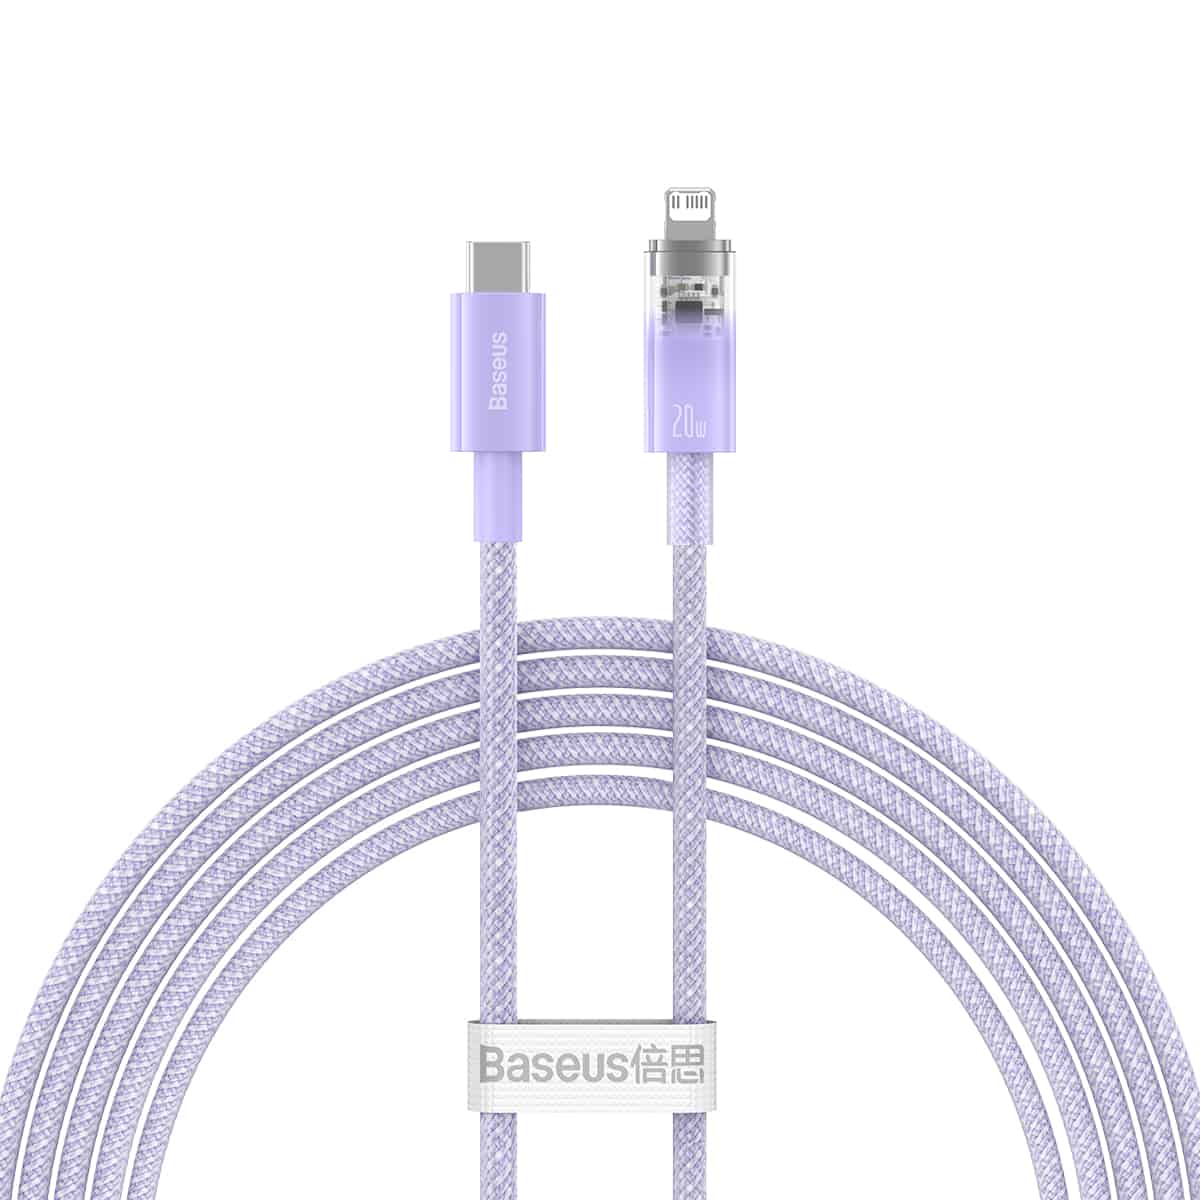 Baseus Explorer Series Fast Charging Cable with Smart Temperature Control Type-C to iPhone 20W